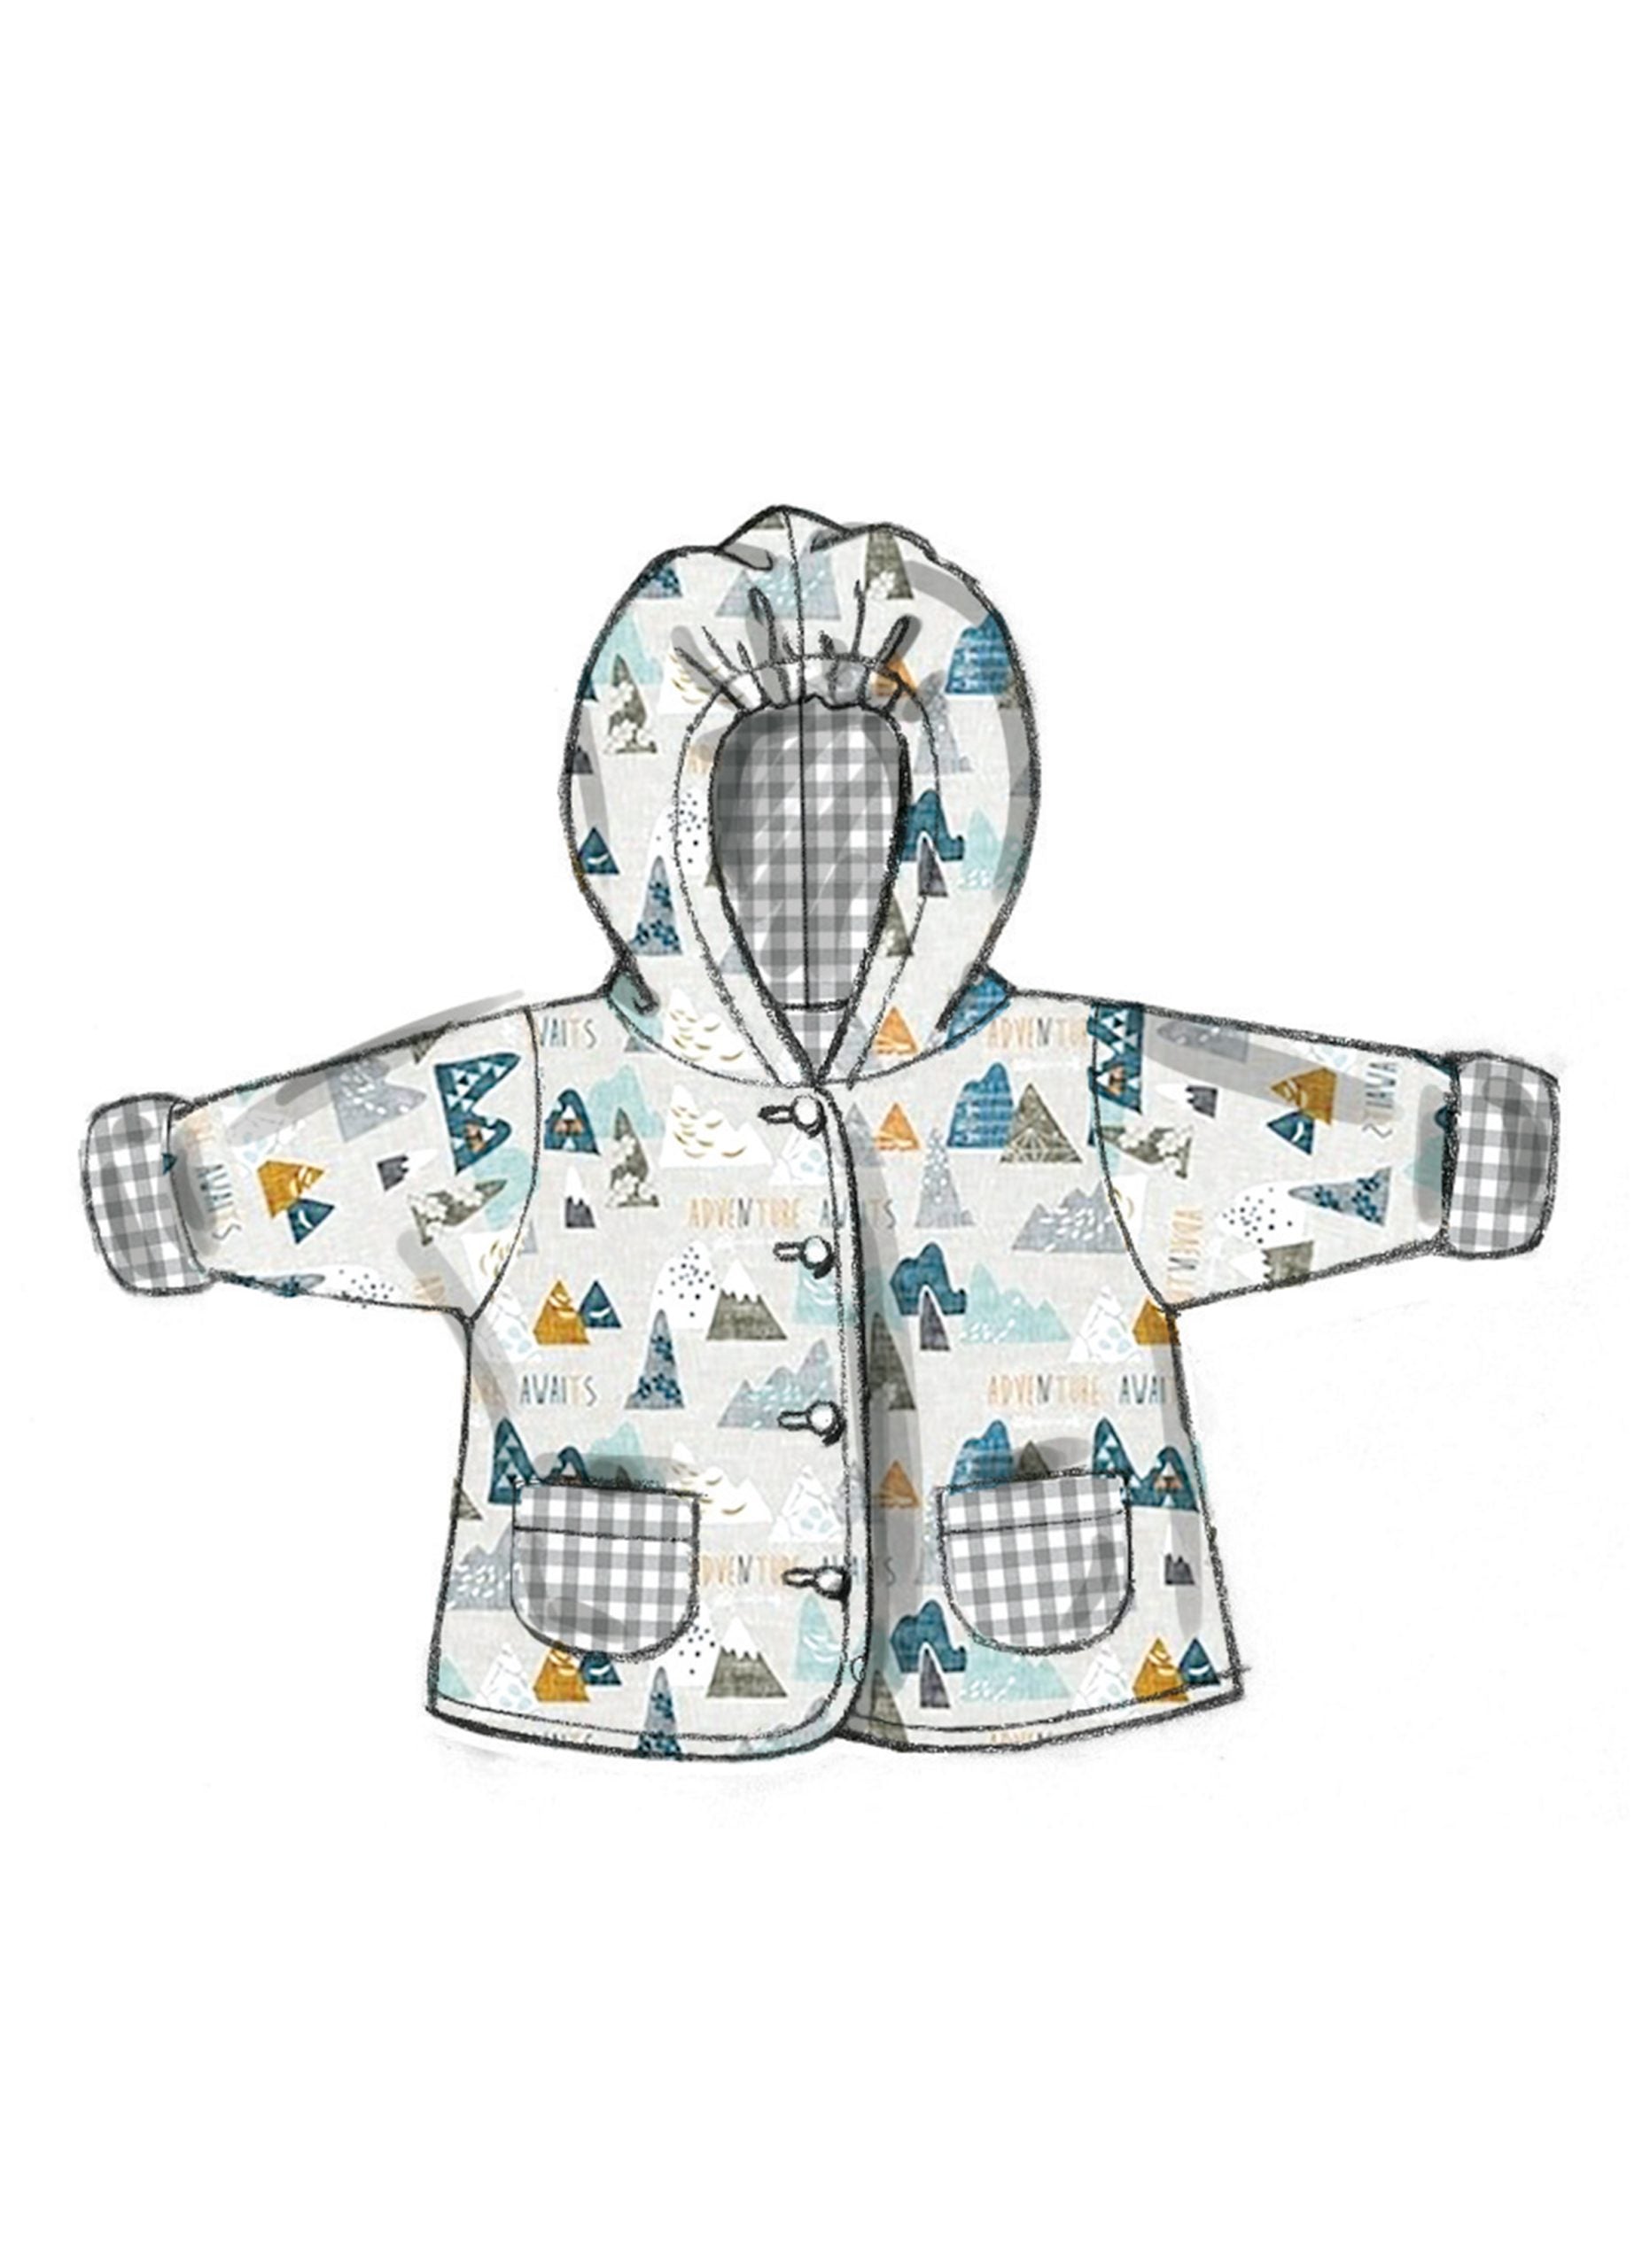 Butterick Baby's Outfit B6969